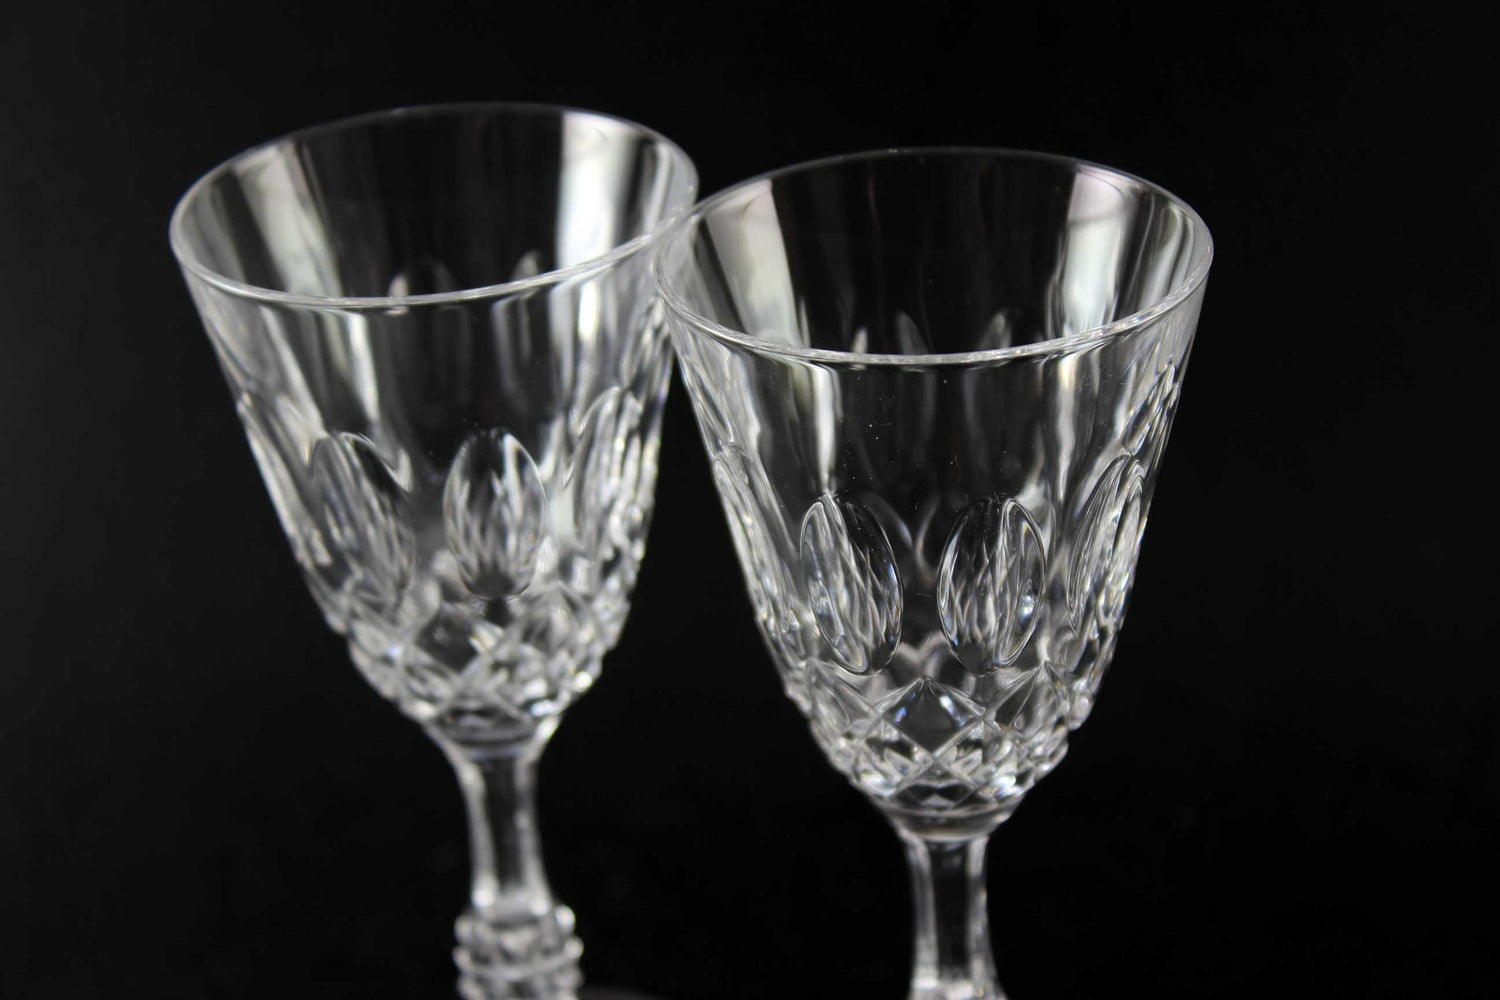 Cross and Olive Cordial/Liqueur Glasses